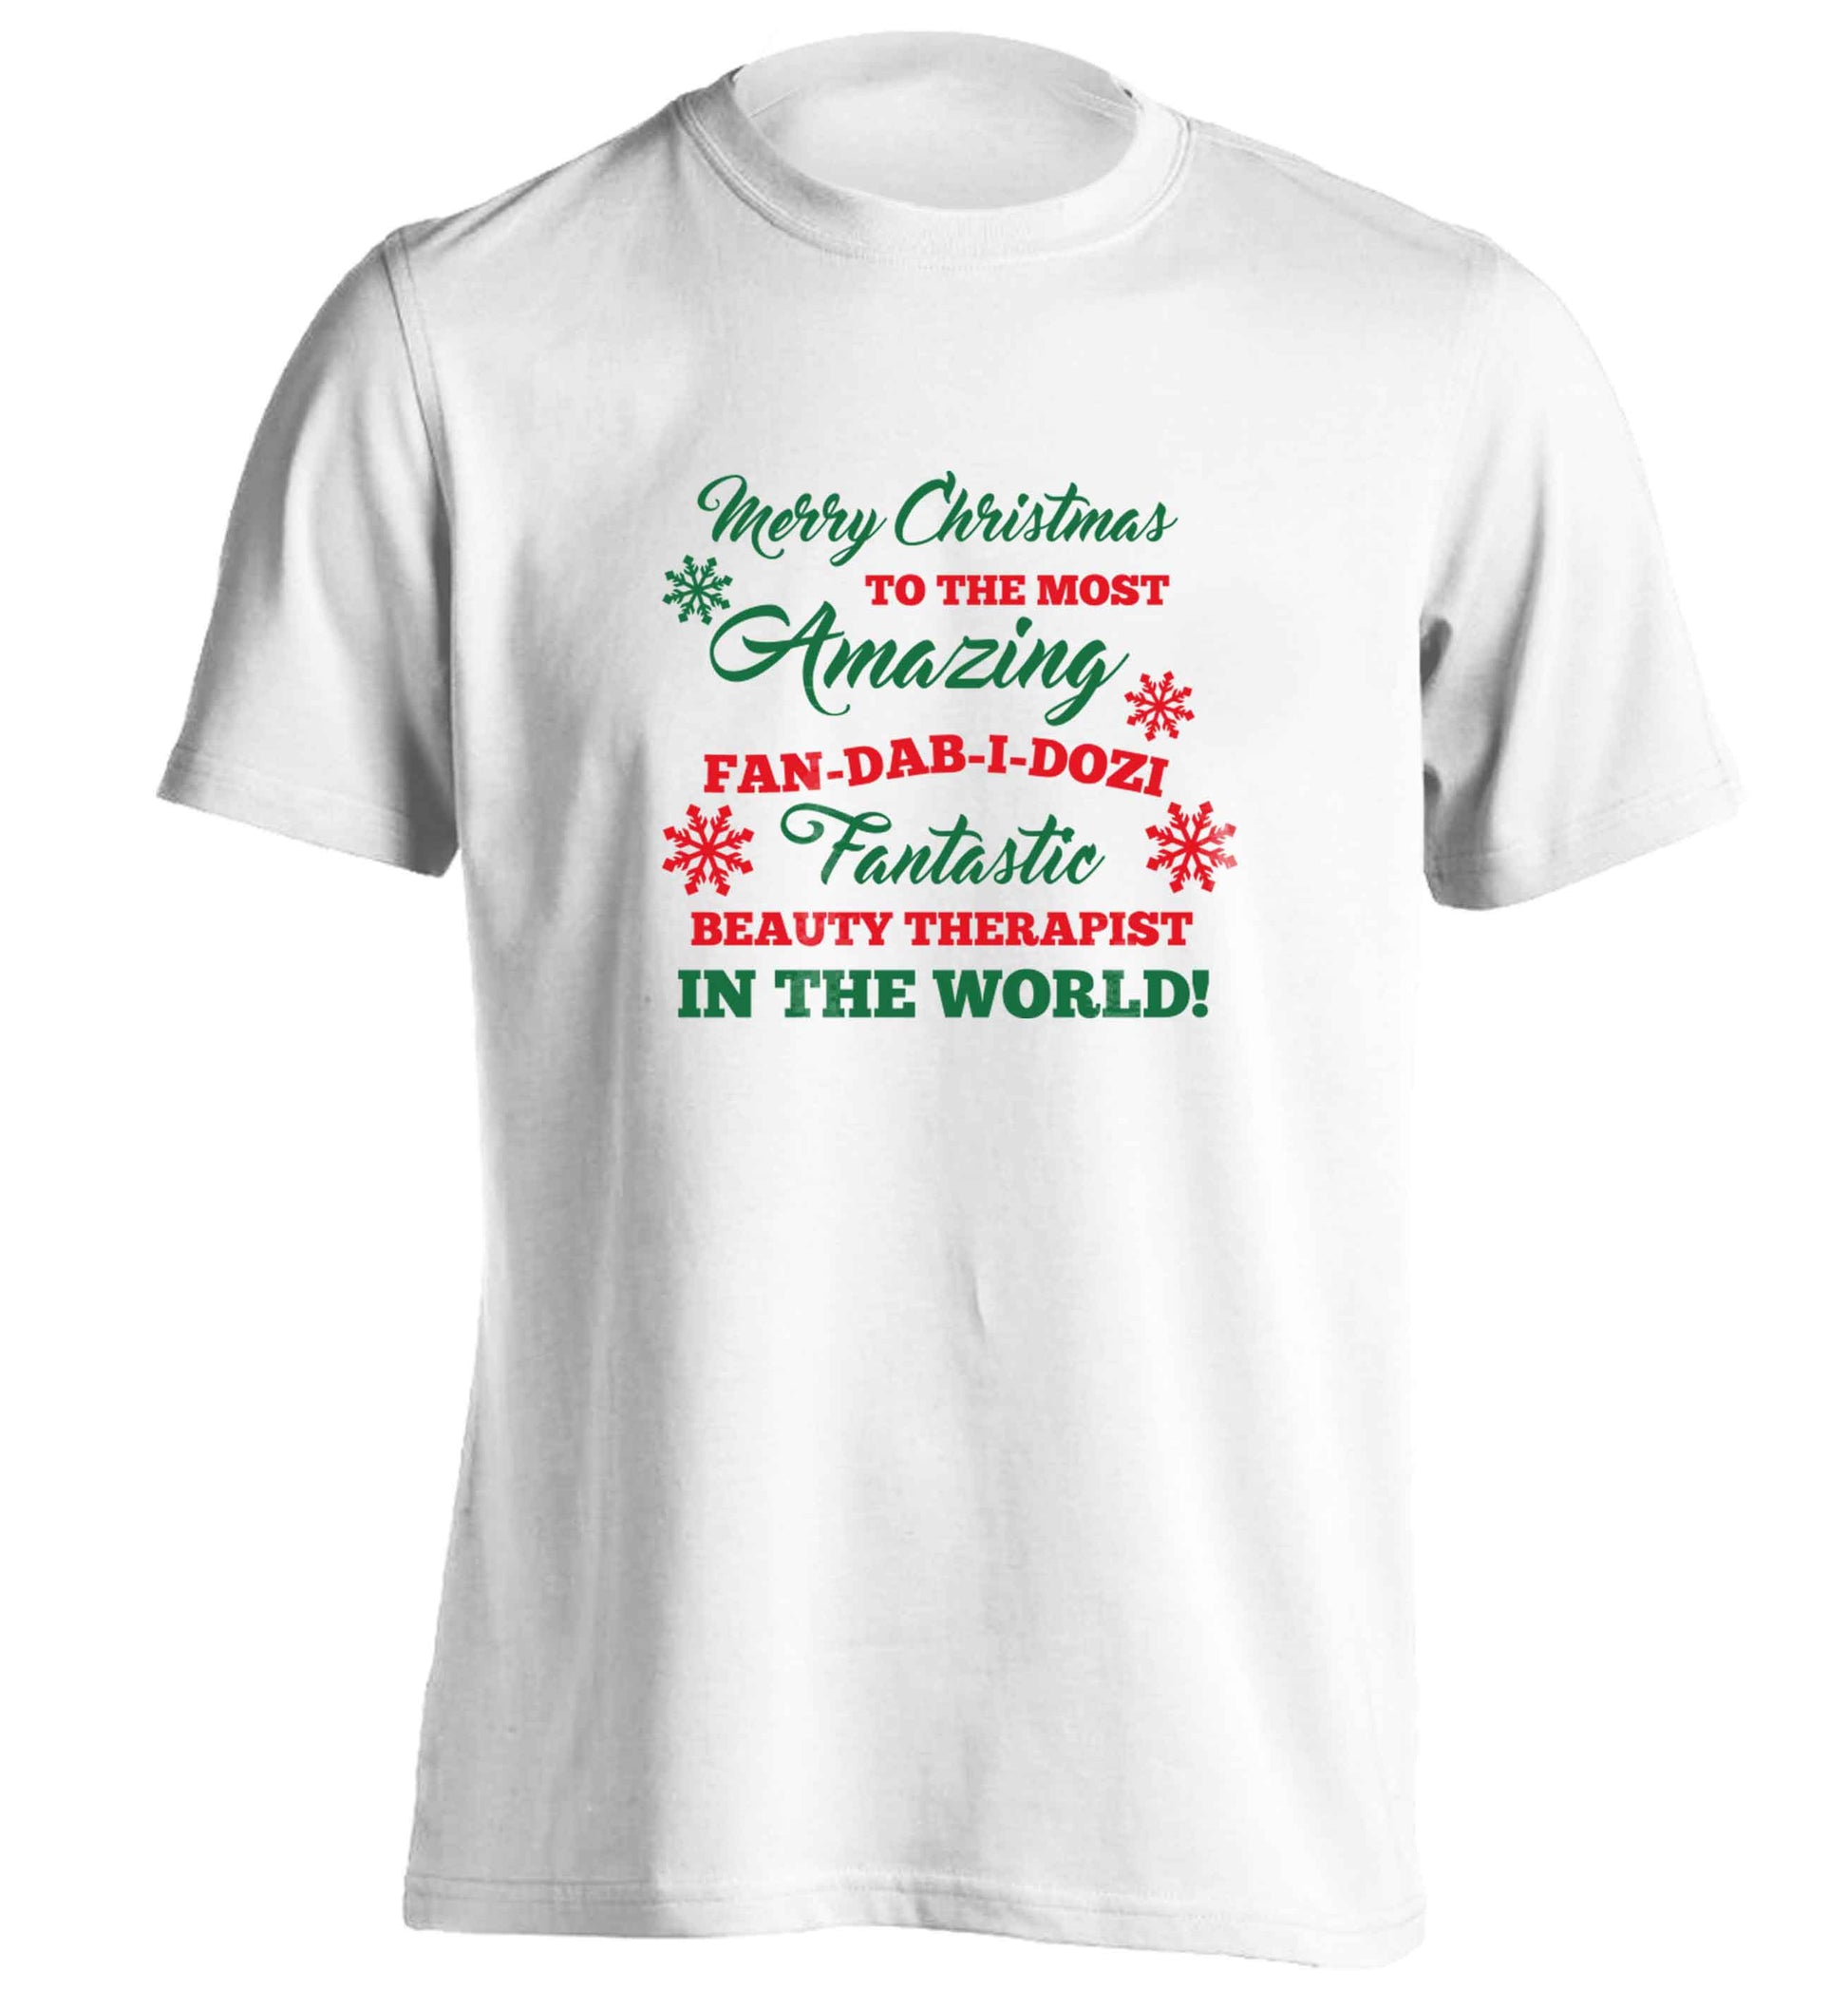 Merry Christmas to the most amazing fan-dab-i-dozi fantasic beauty therapist in the world adults unisex white Tshirt 2XL